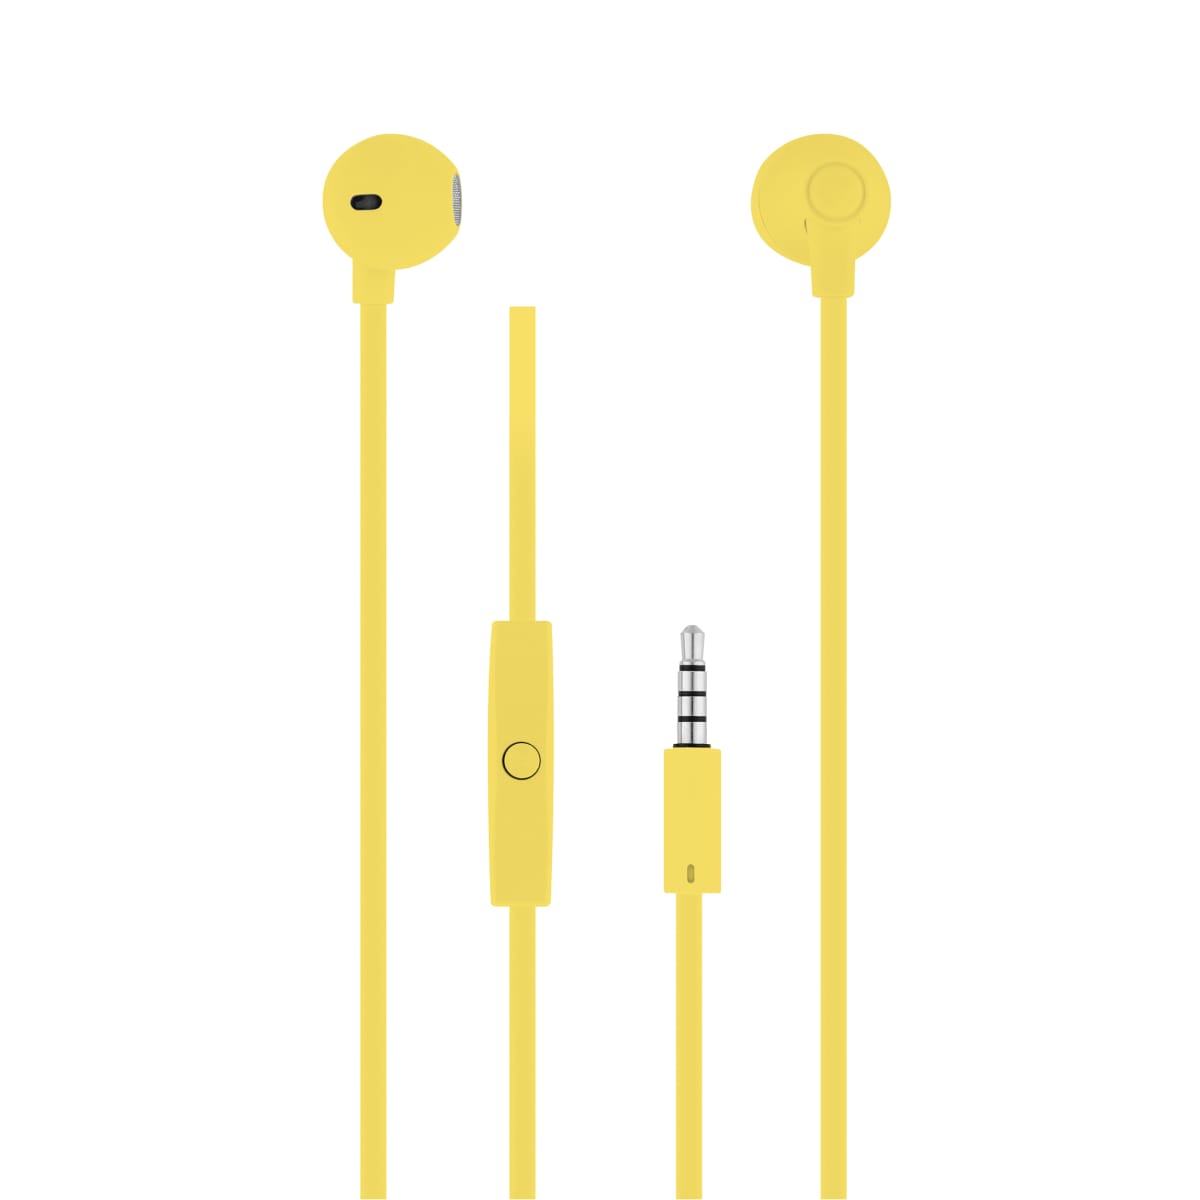 Auriculares con cable SWEET jack amarillo